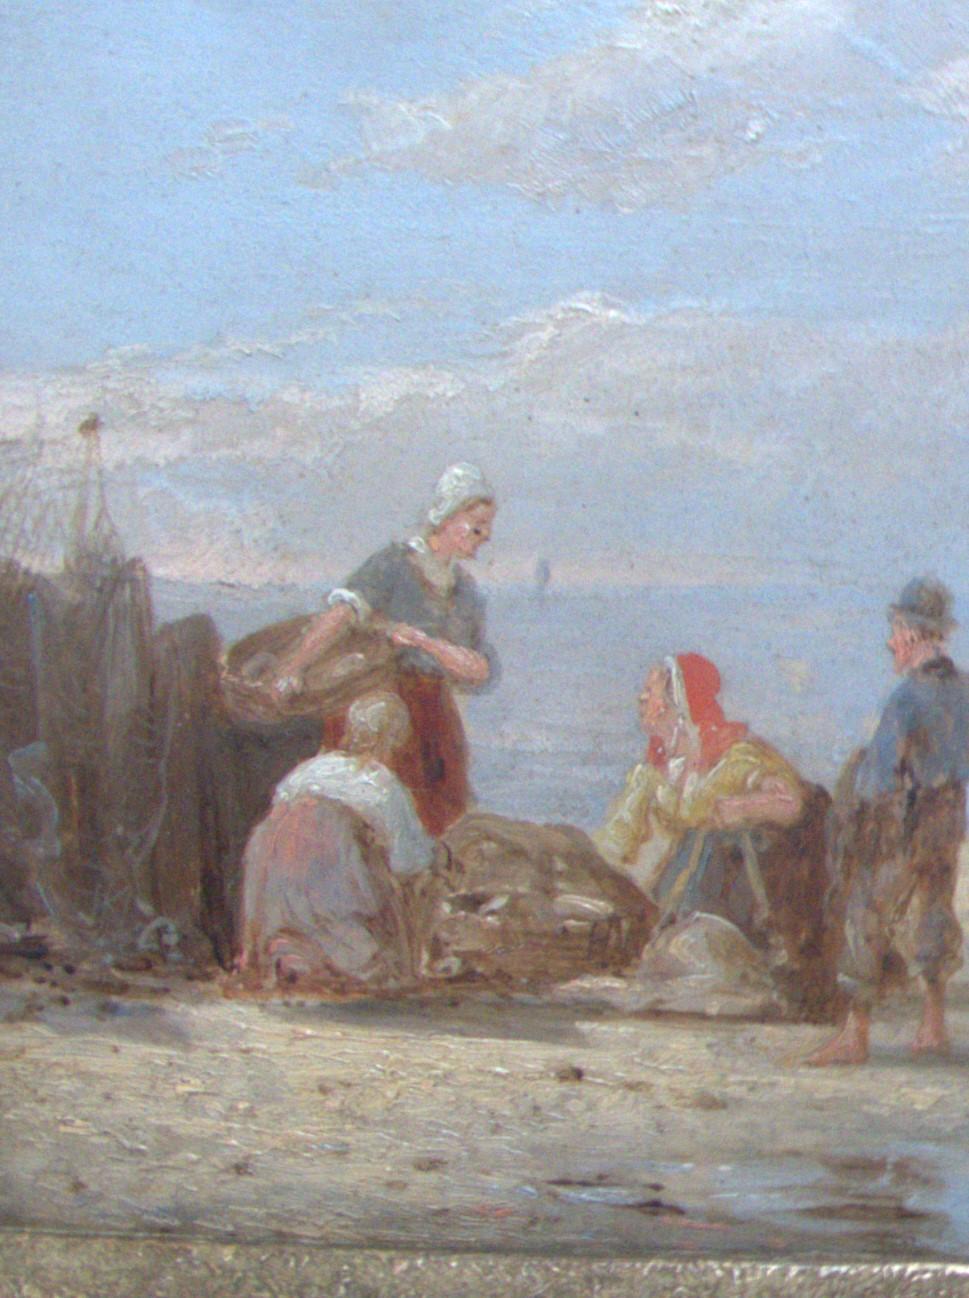 PIETER CORNELIIS DOMMERSEN Dutch 1834-1900
Fmous for his marine subjects. He showed a great sense of composition with atmospheric activity in his scenes
The fishermen in deep conversation having landed a good catch and with the boats with full